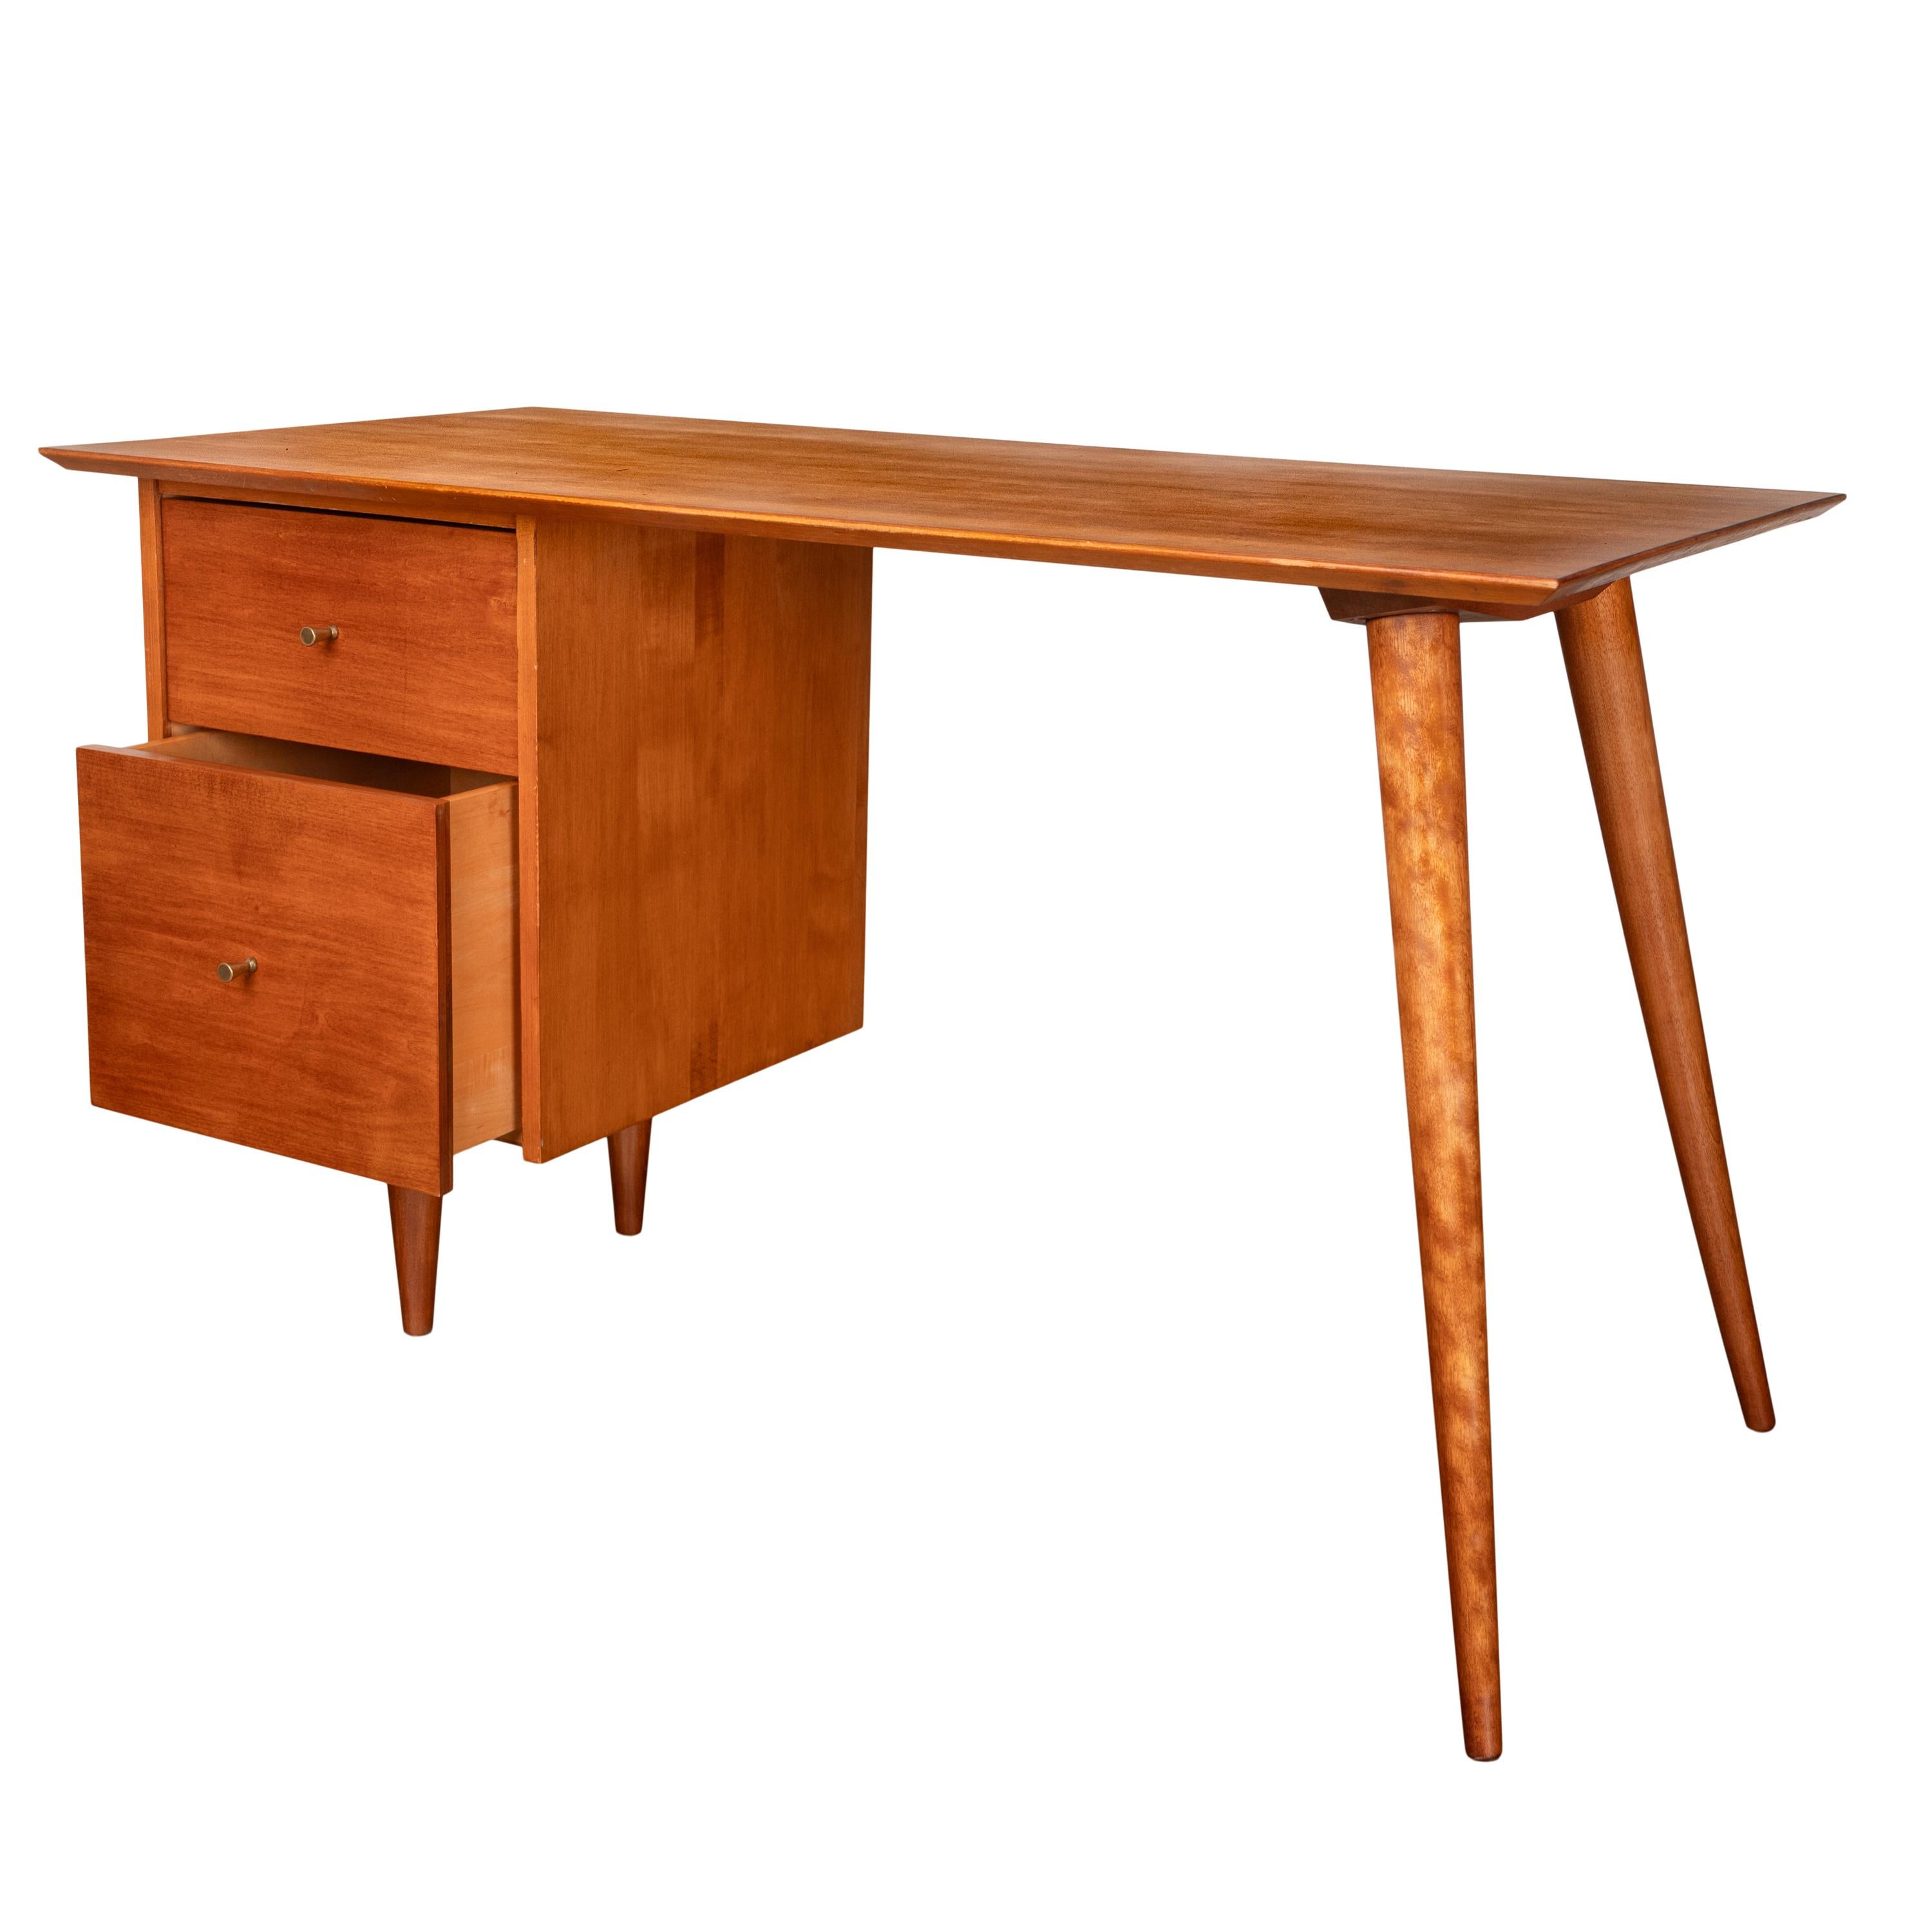 American Mid Century Modern Paul McCobb Planner Group Maple # 1560 Desk 1950's In Good Condition For Sale In Portland, OR